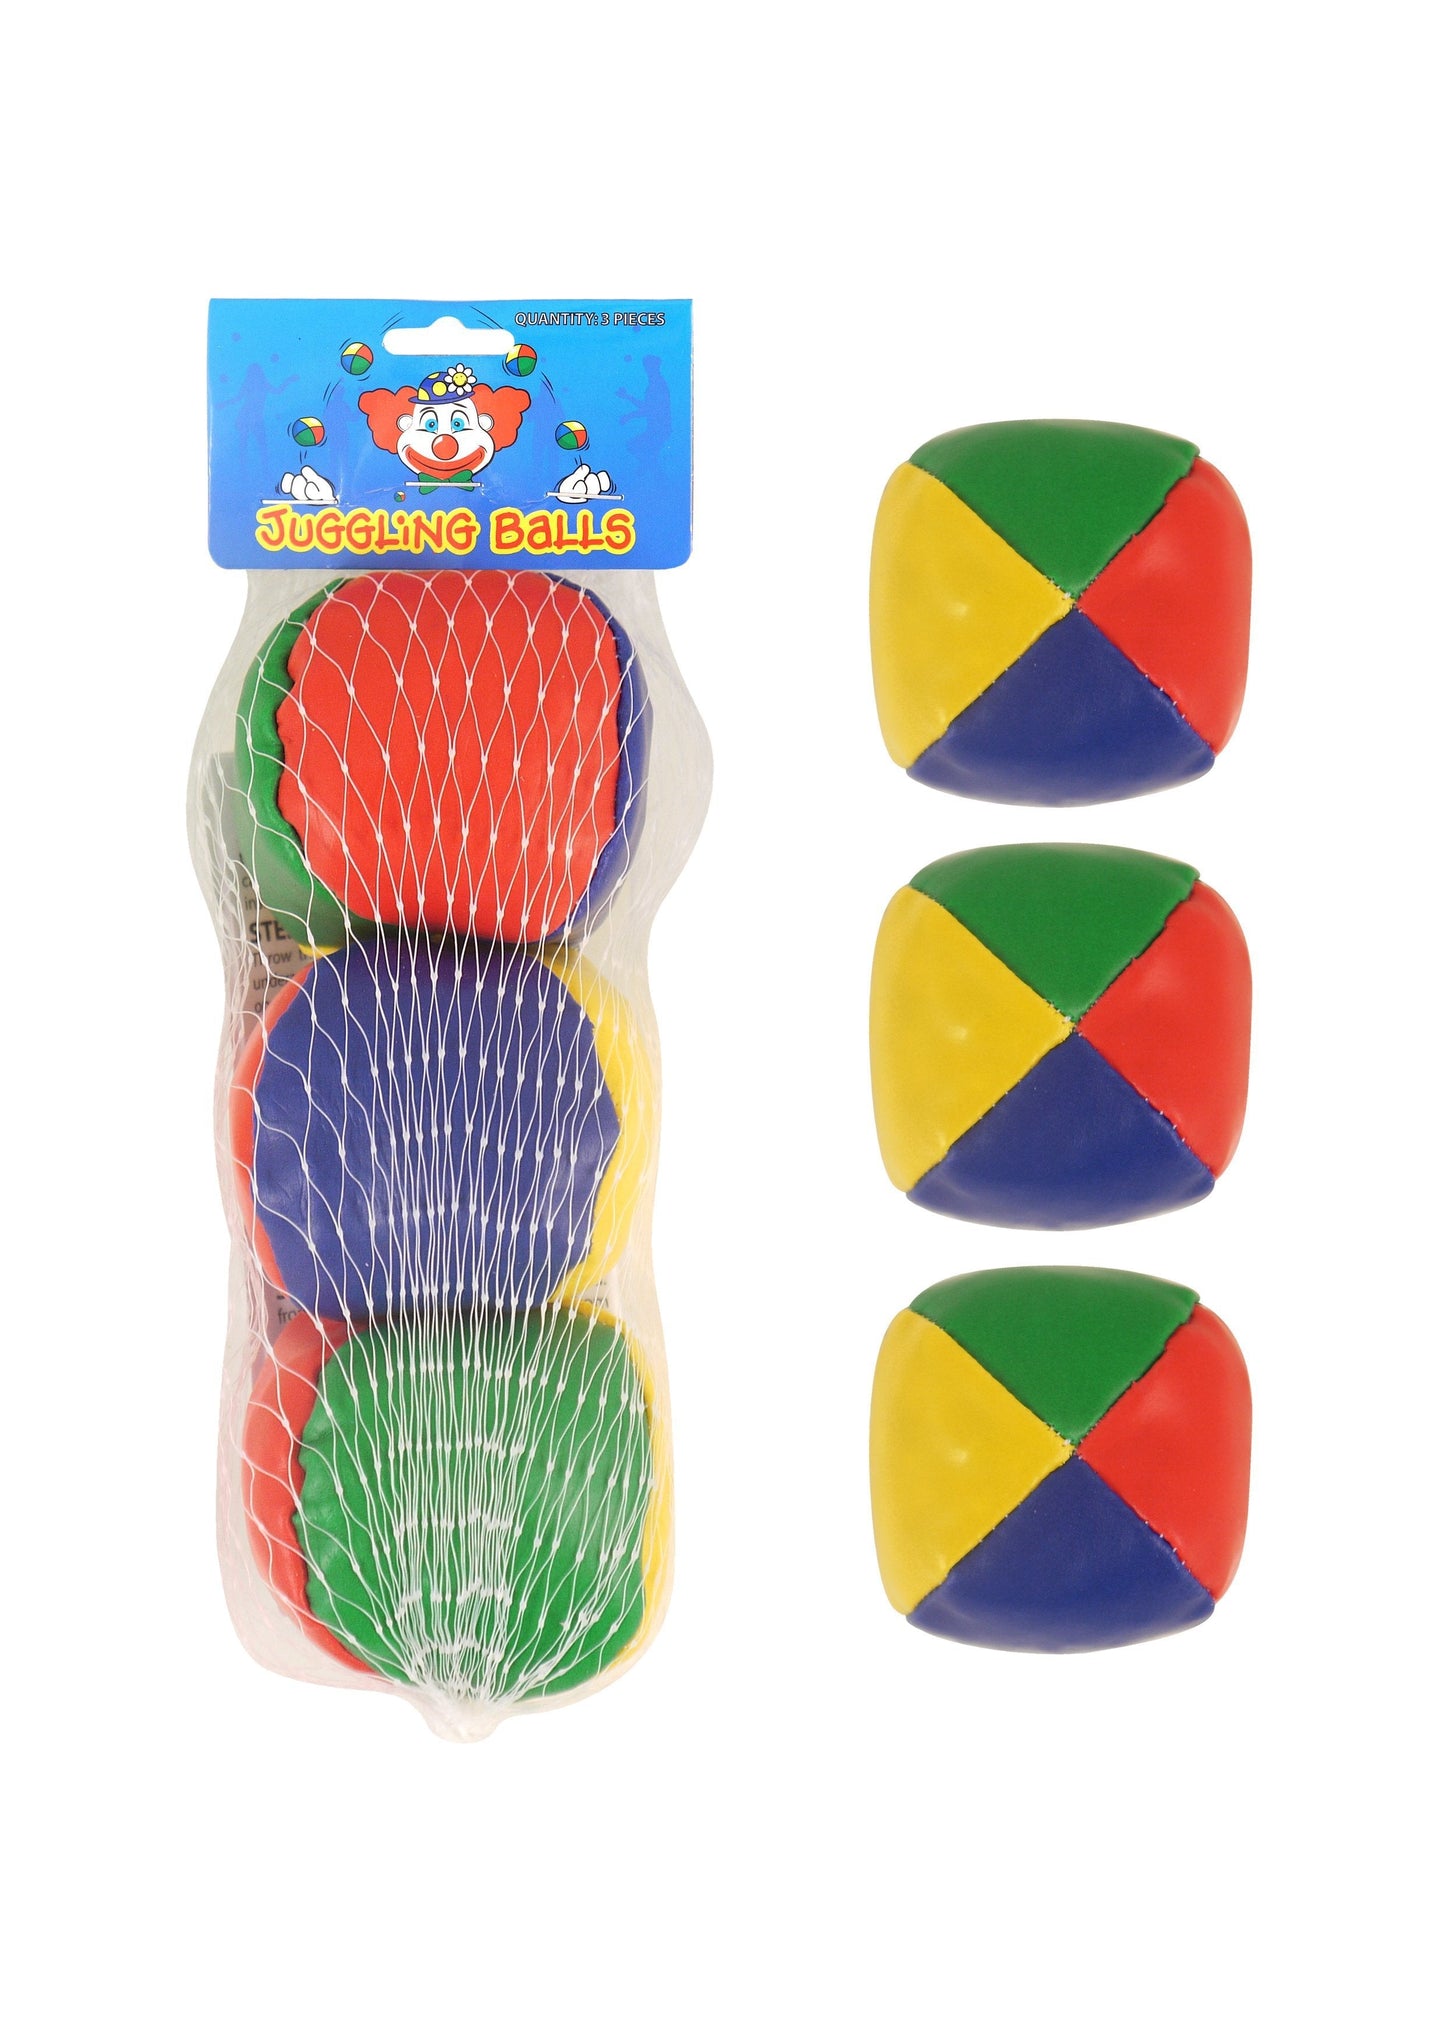 3 Soft Juggling Balls Circus Clown Coloured Learn To Juggle Toy Game T03069 (Parcel Rate)